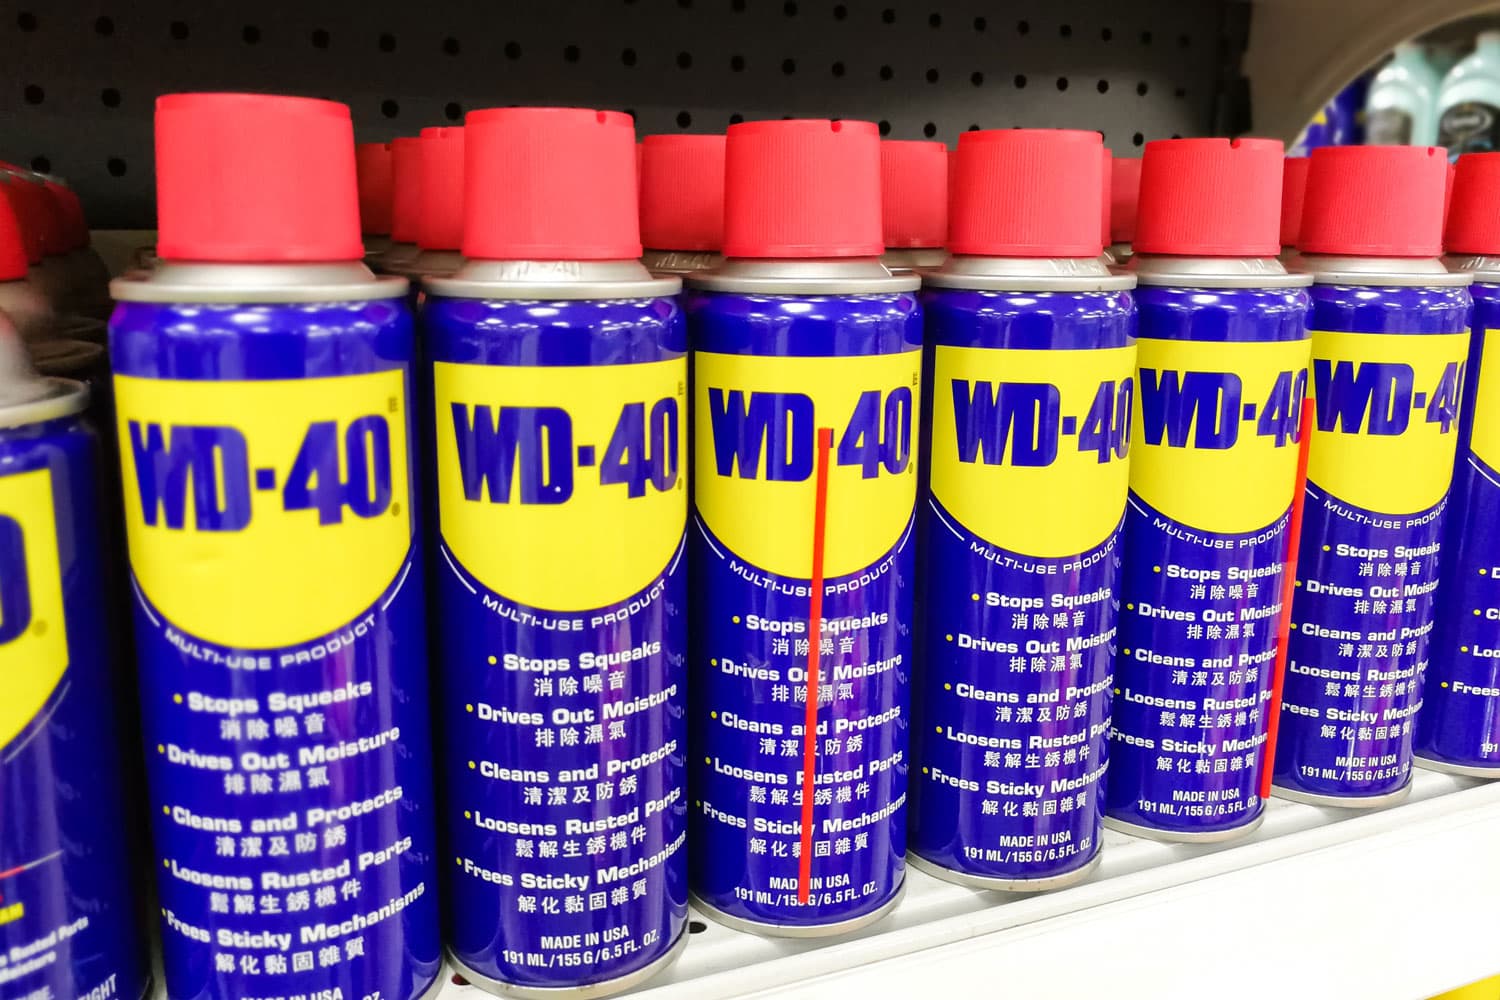 WD-40 products in the store shelf